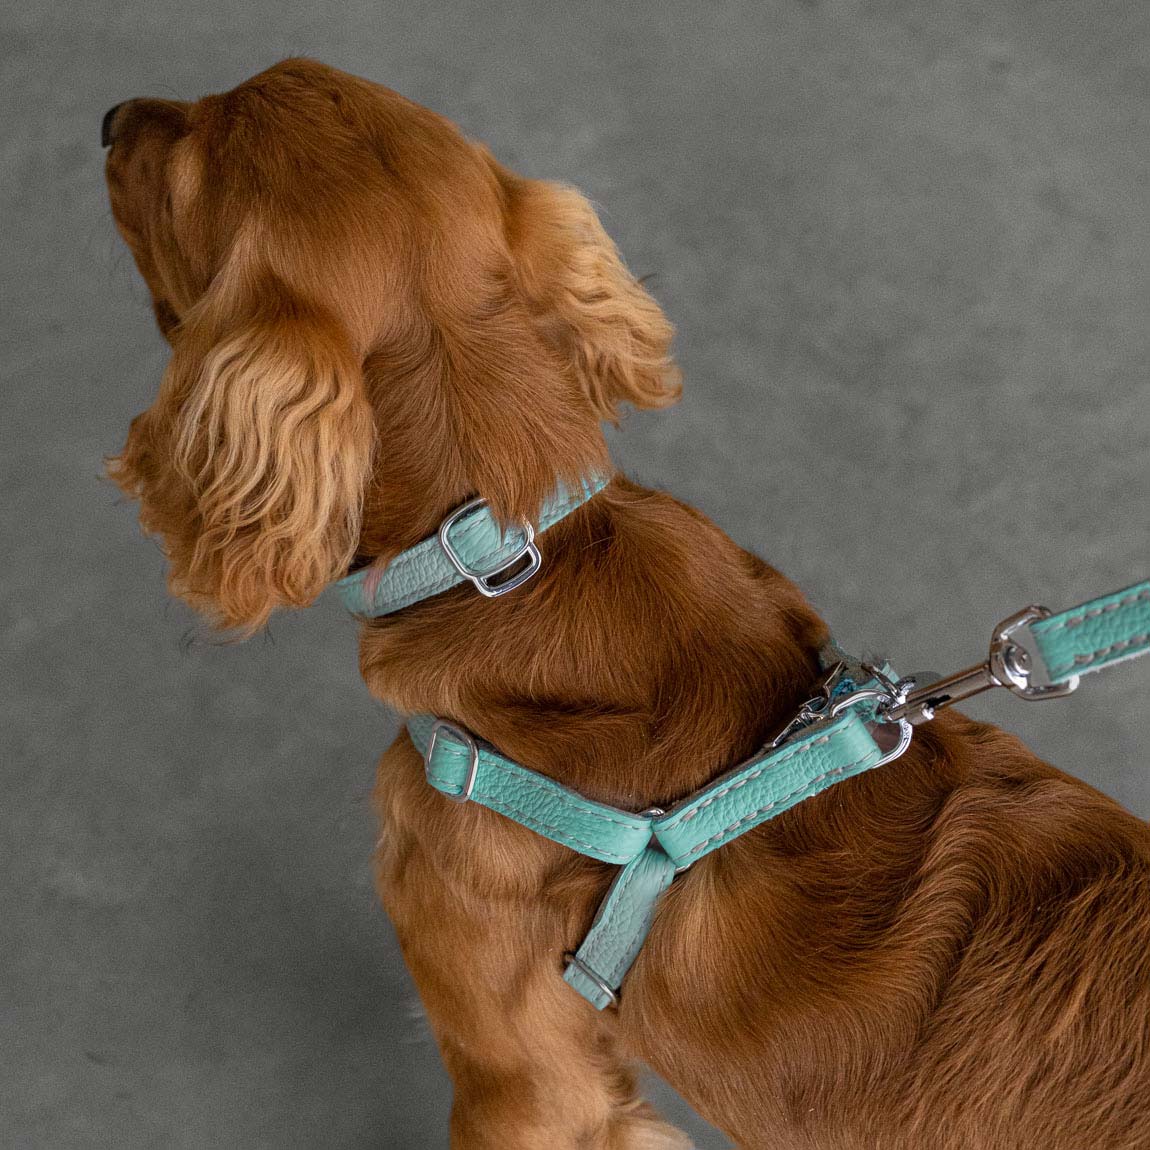 Leather Dog Lead - Light Blue and Off-white